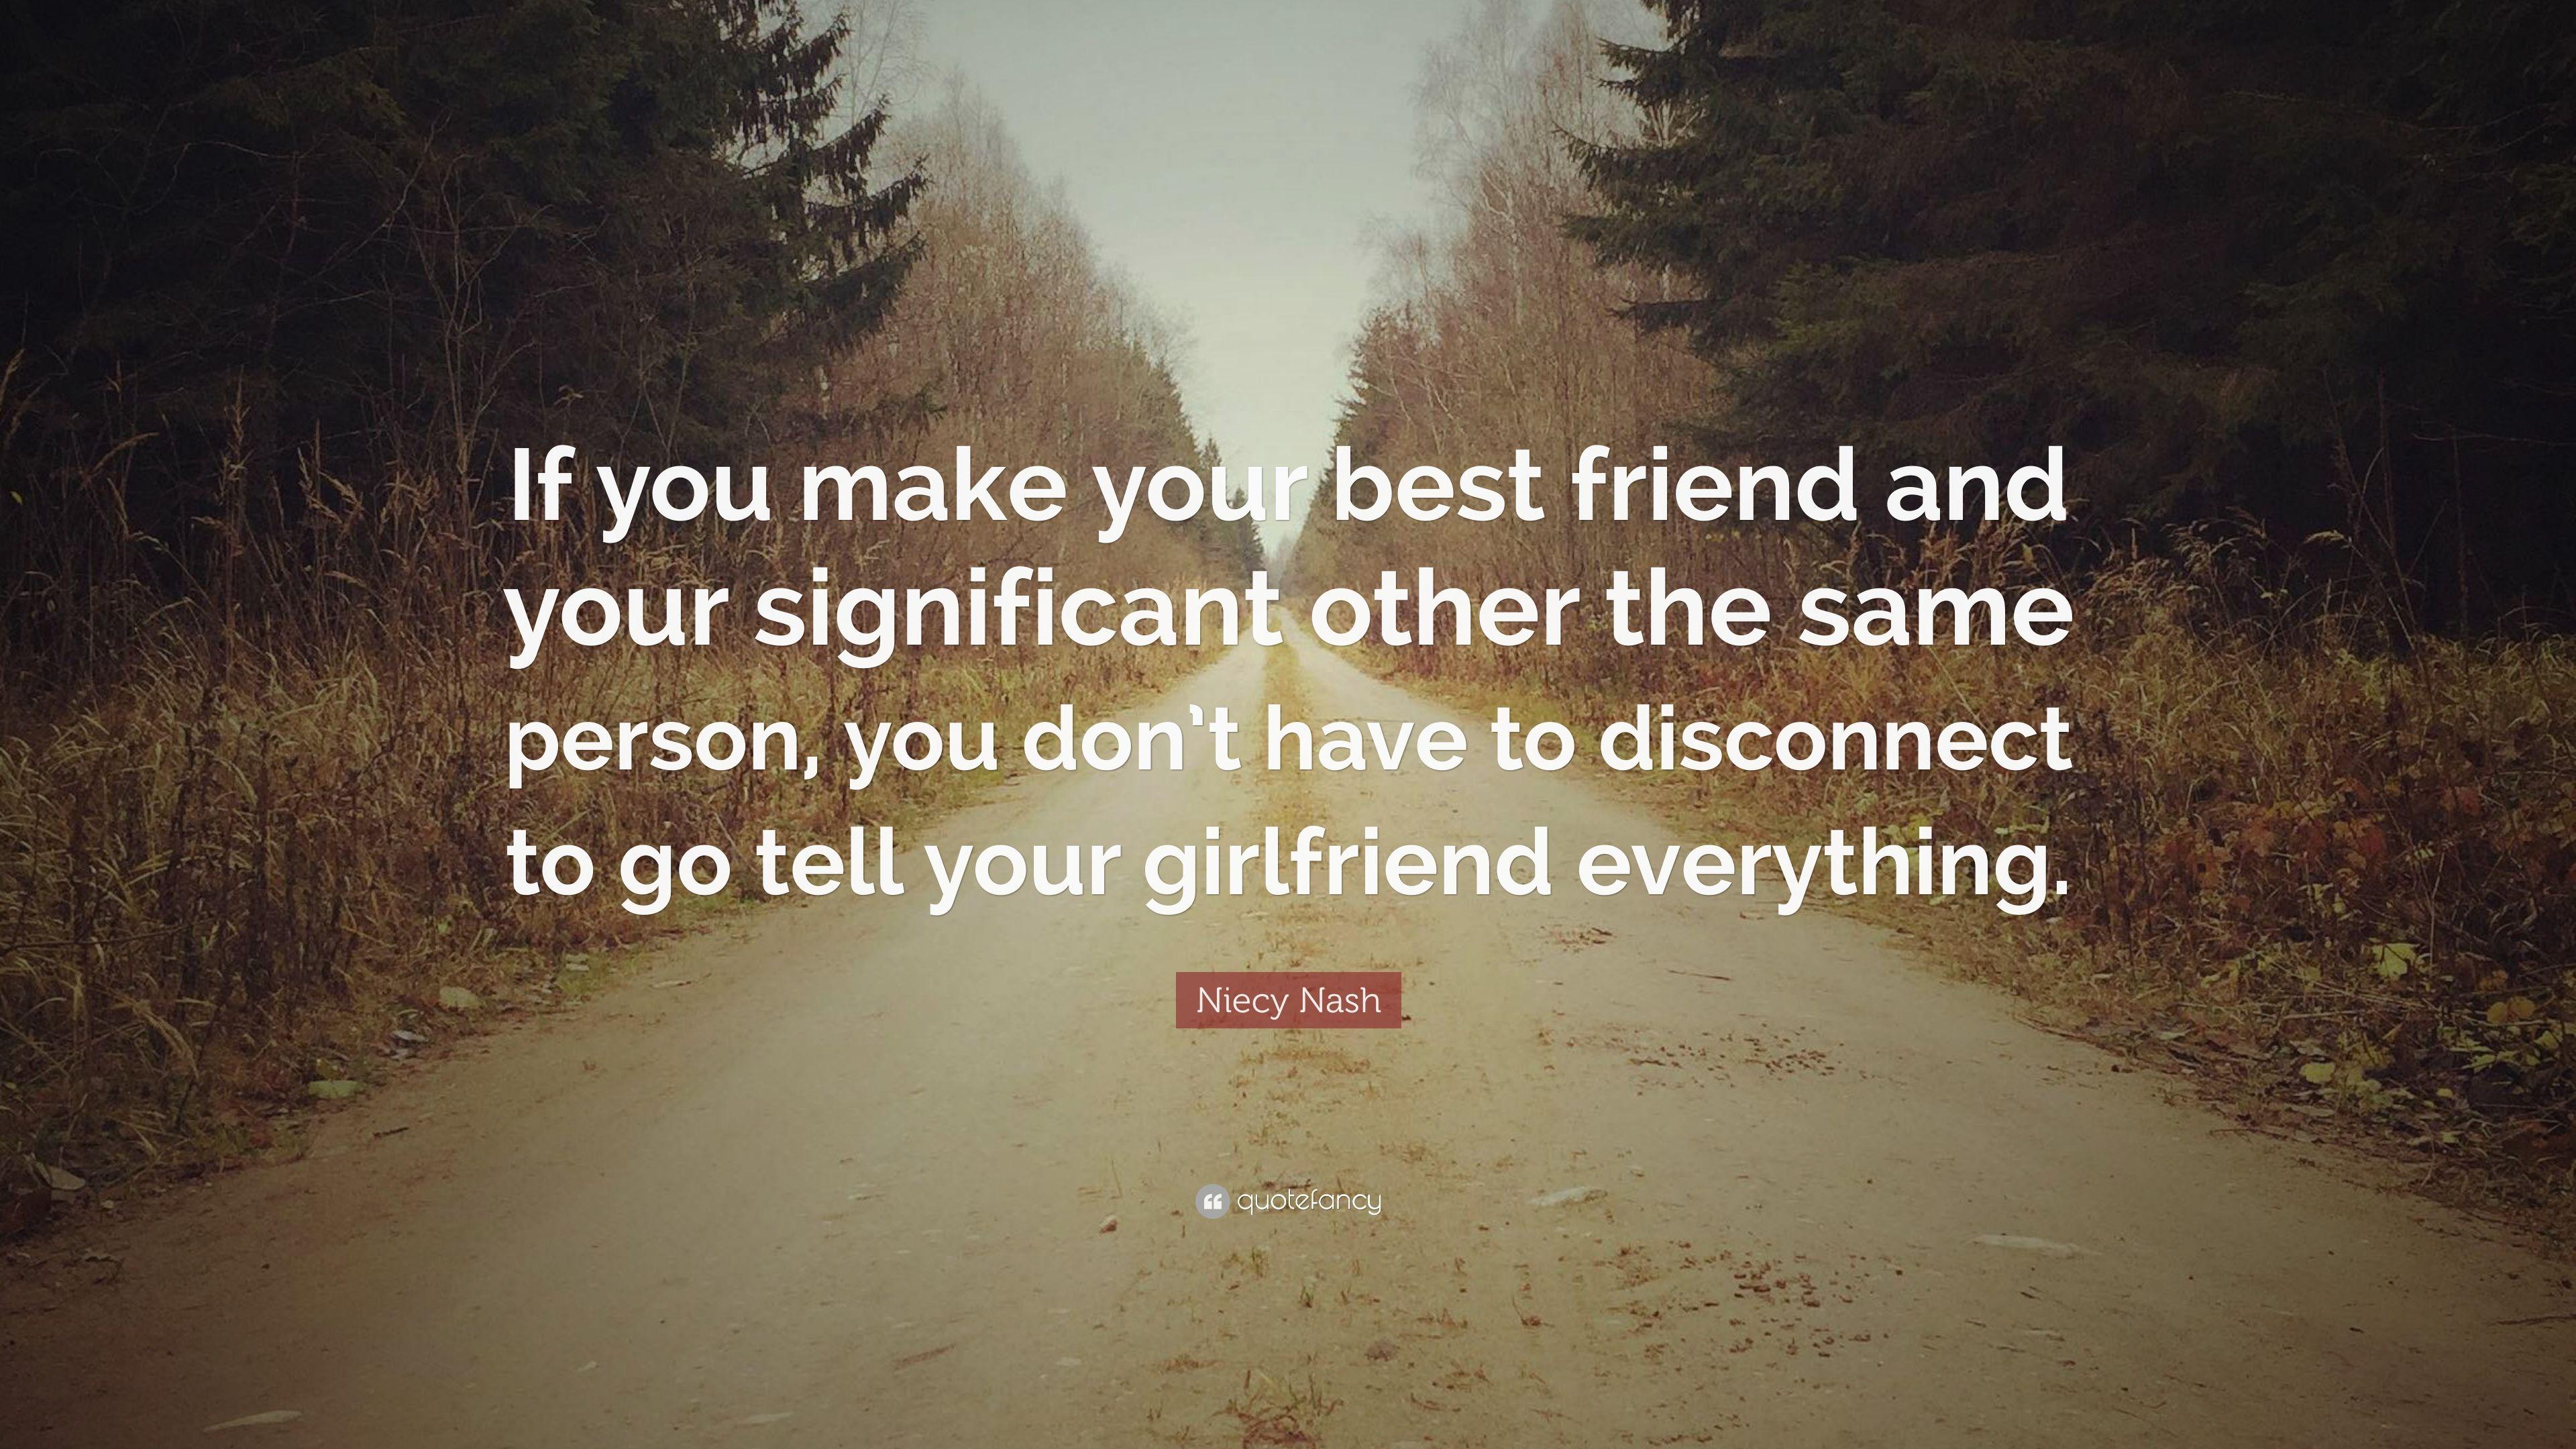 Niecy Nash Quote: “If you make your best friend and your significant